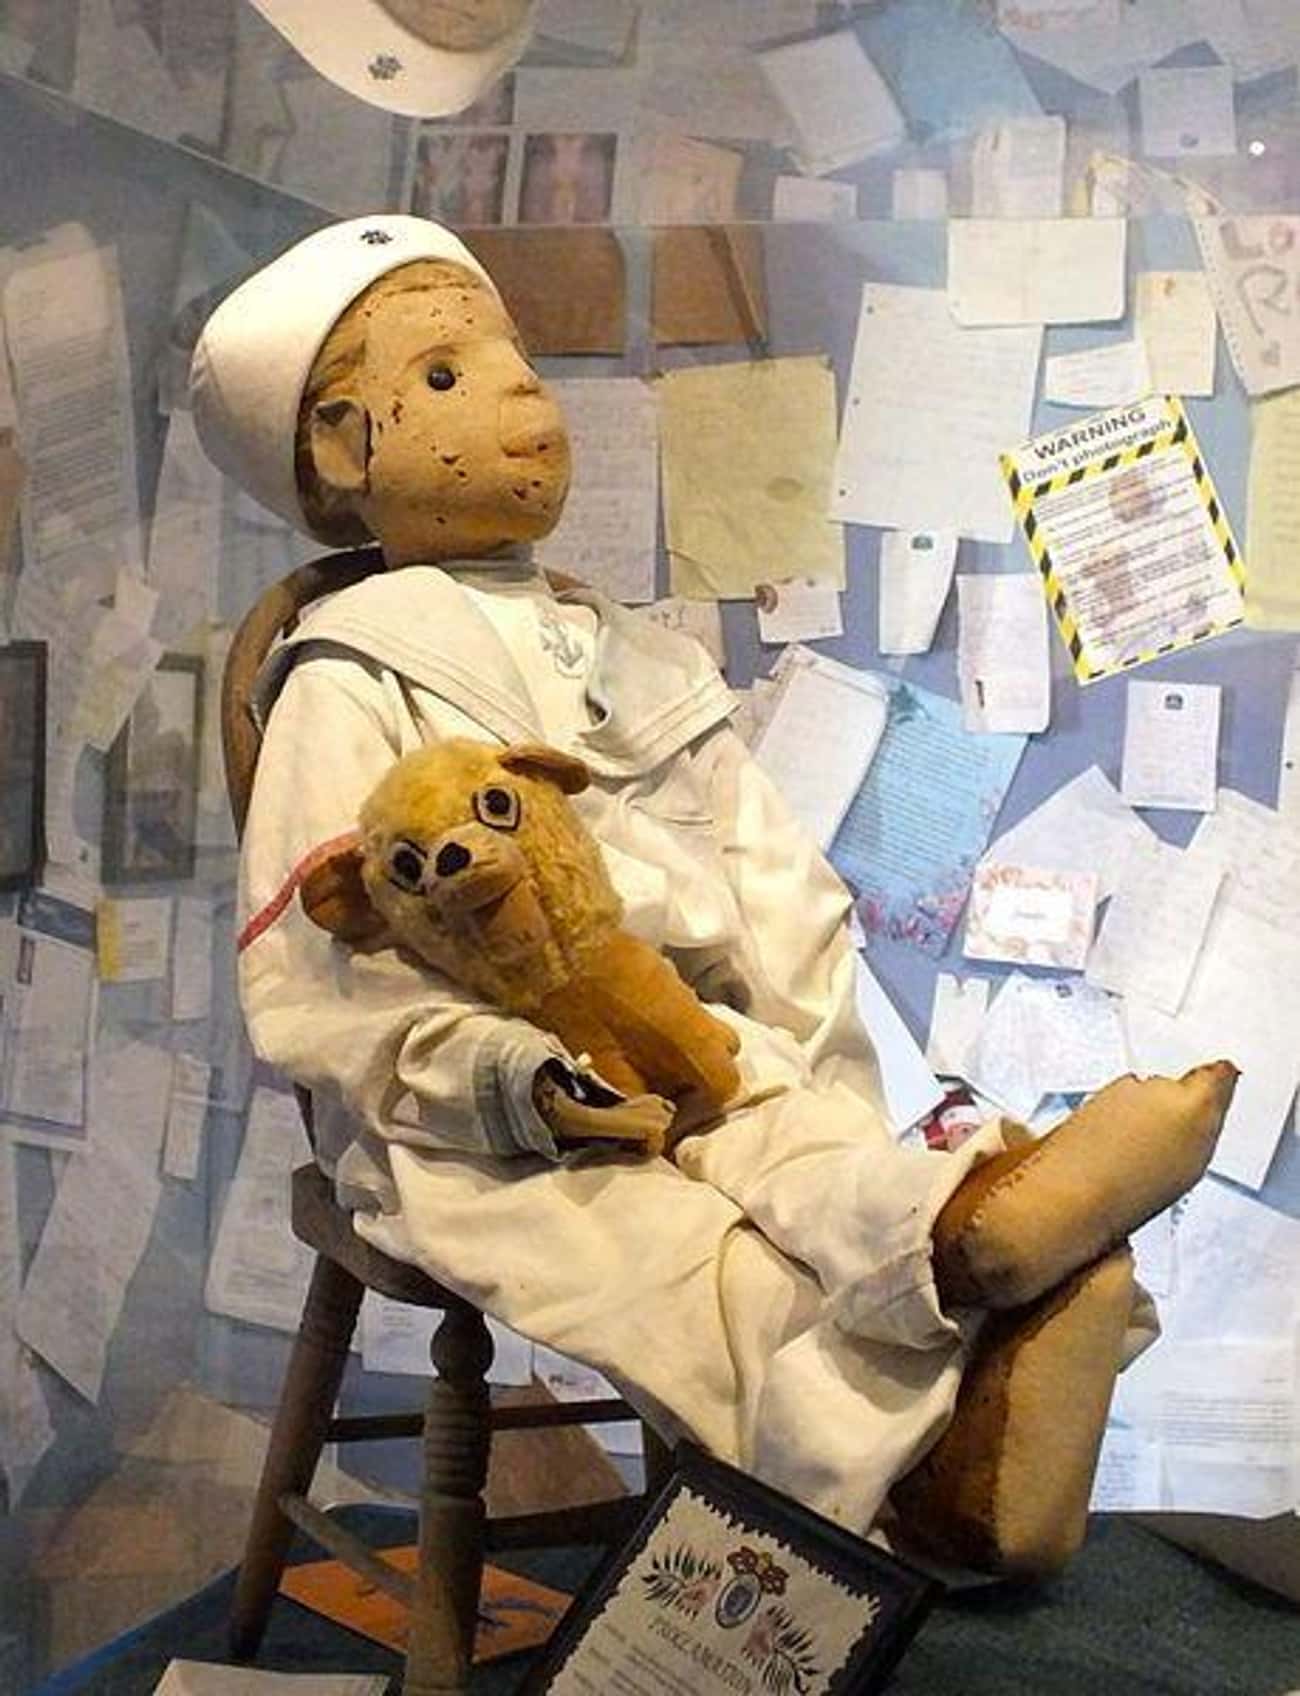 The World's Most Haunted Doll Lives In Key West